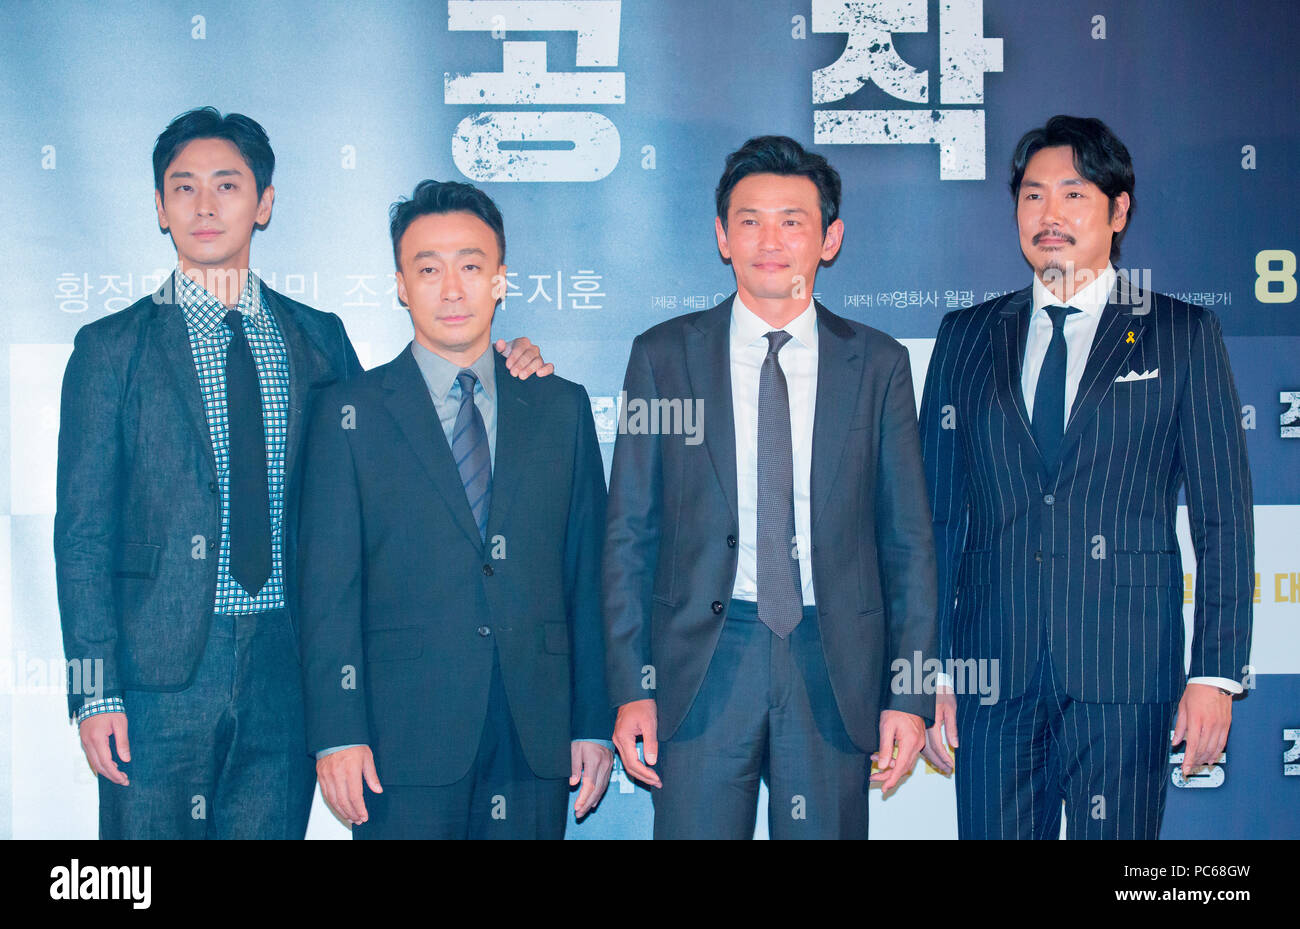 Ju Ji-Hoon, Lee Sung-Min, Hwang Jung-Min and Cho Jin-Woong, July 31, 2018 : Cast members (L-R) Ju Ji-Hoon, Lee Sung-Min, Hwang Jung-Min and Cho Jin-Woong pose at a press conference for their new film 'The Spy Gone North' at a theatre in Seoul, South Korea. The spy film tells the story of a South Korean spy who goes undercover as a businessman in North Korea in the 1990s to infiltrate North's nuclear facilities using the codename 'Black Venus'. Credit: Lee Jae-Won/AFLO/Alamy Live News Stock Photo